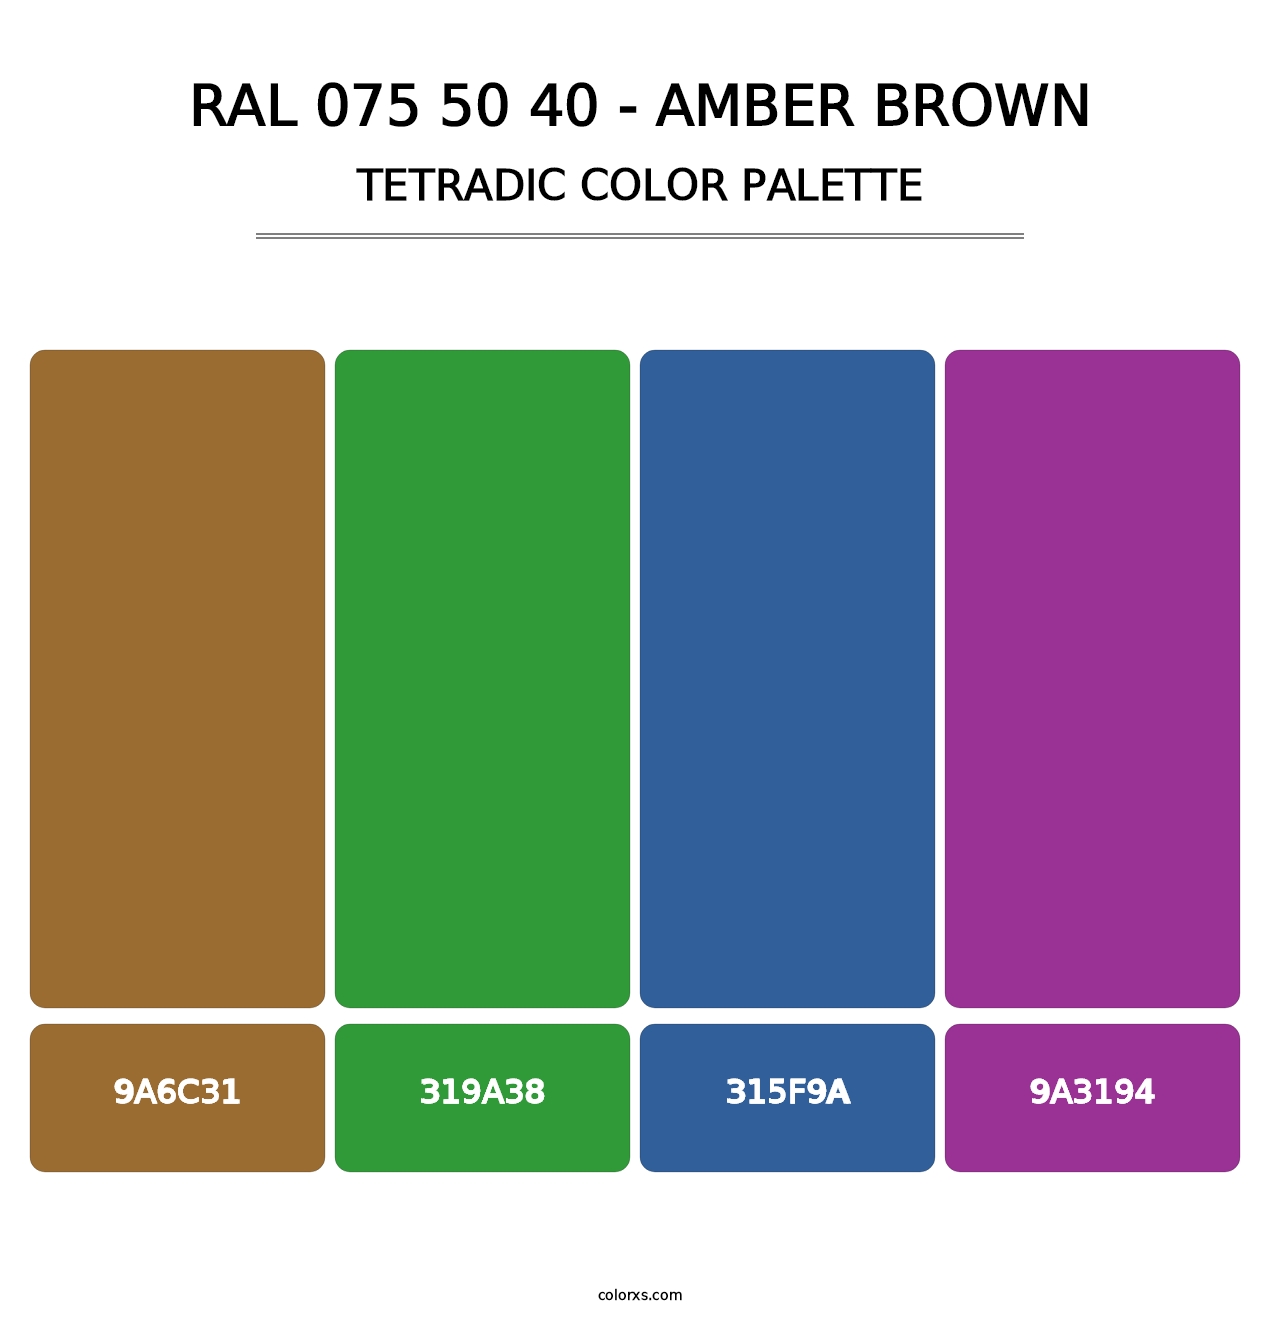 RAL 075 50 40 - Amber Brown - Tetradic Color Palette